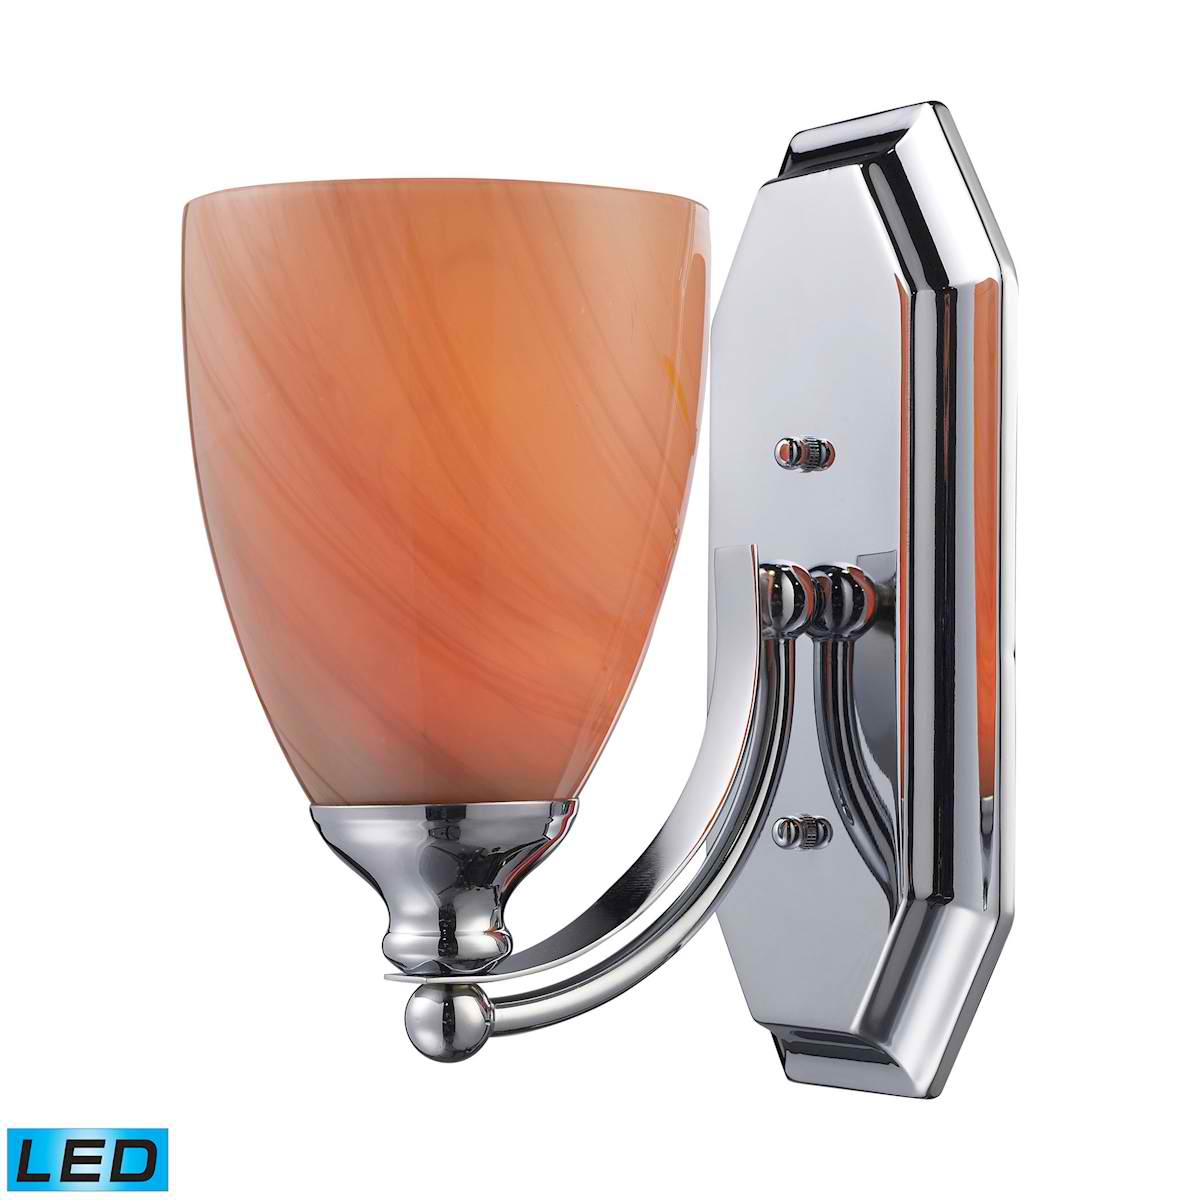 1 Light Vanity in Polished Chrome and Sandy Glass - LED Offering Up To 800 Lumens (60 Watt Equivalent)